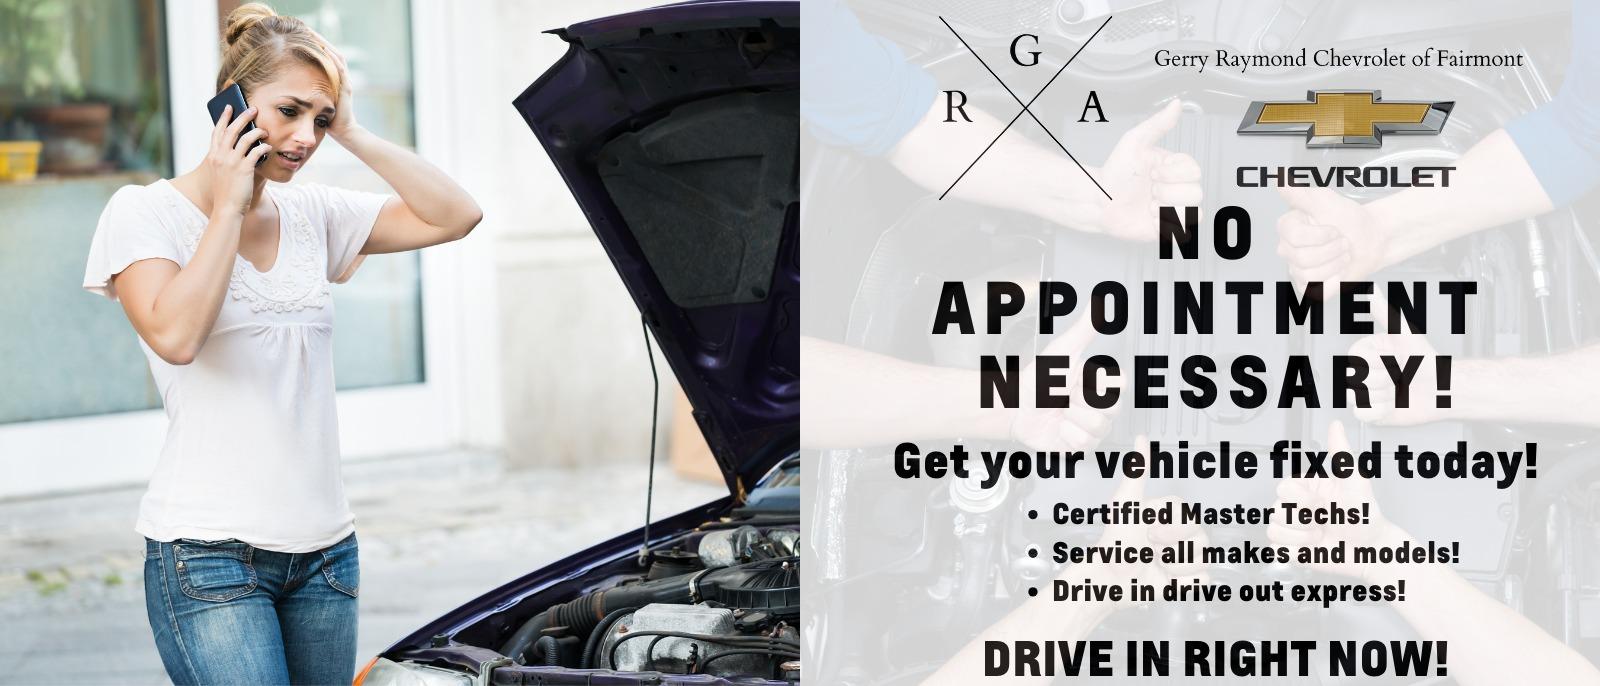 No appointment necessary for service at Gerry Raymond Chevrolet of Fairmont!